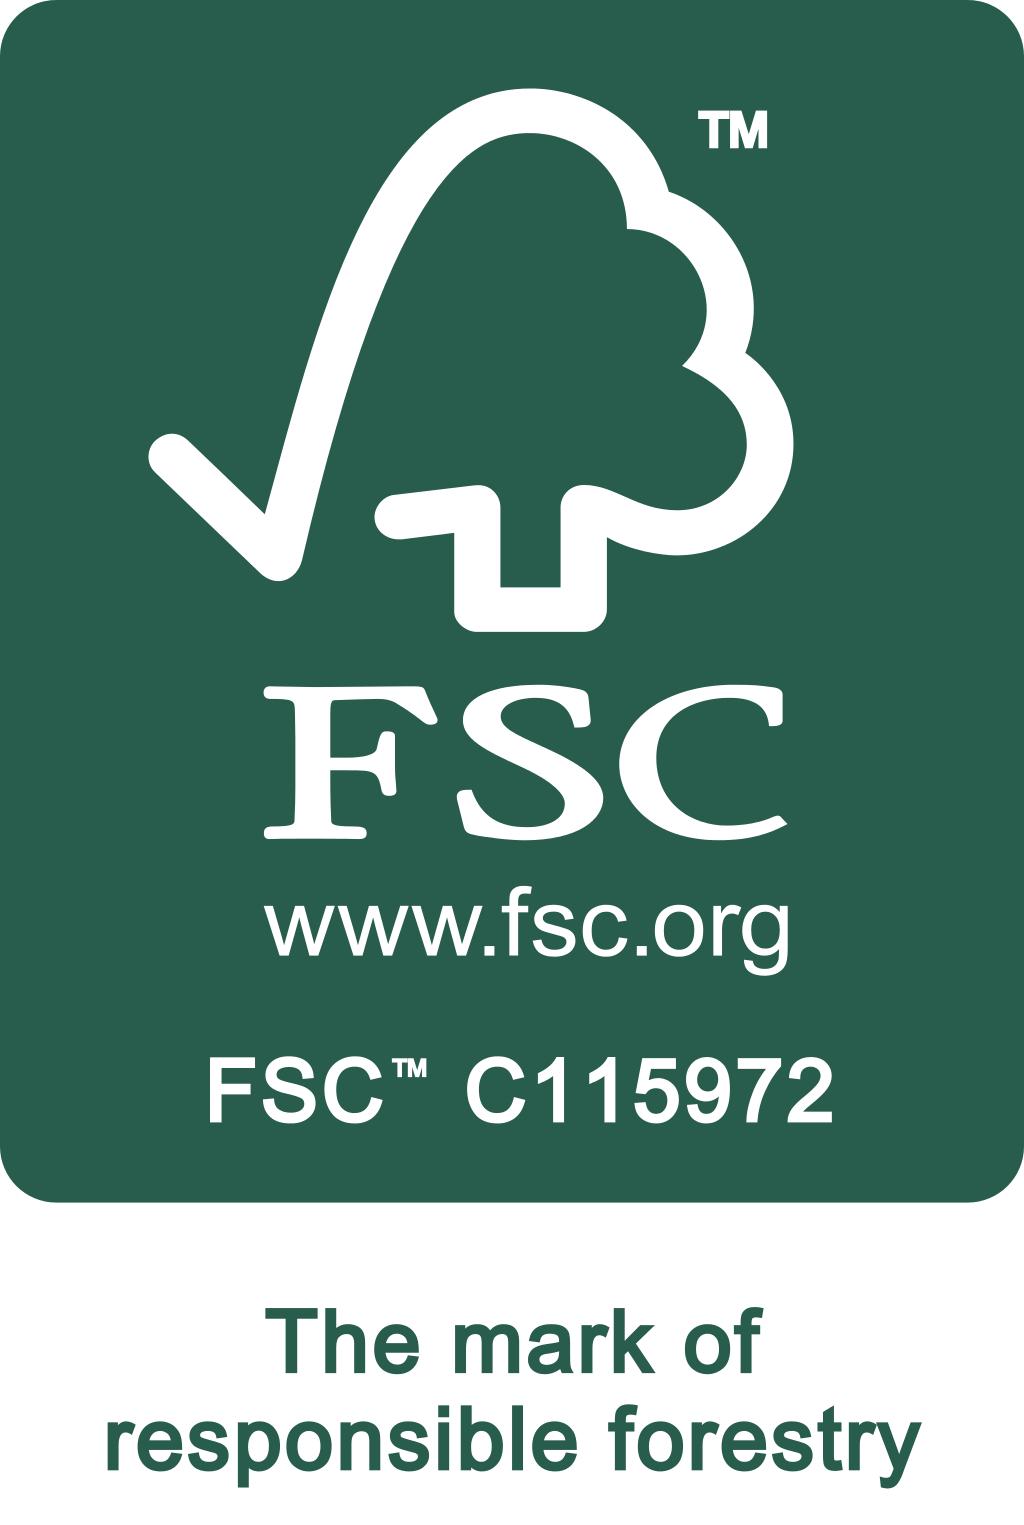 FSC_C115972_Promotional_with_text_Portrait_WhiteOnGreen_tm_aAYcE1